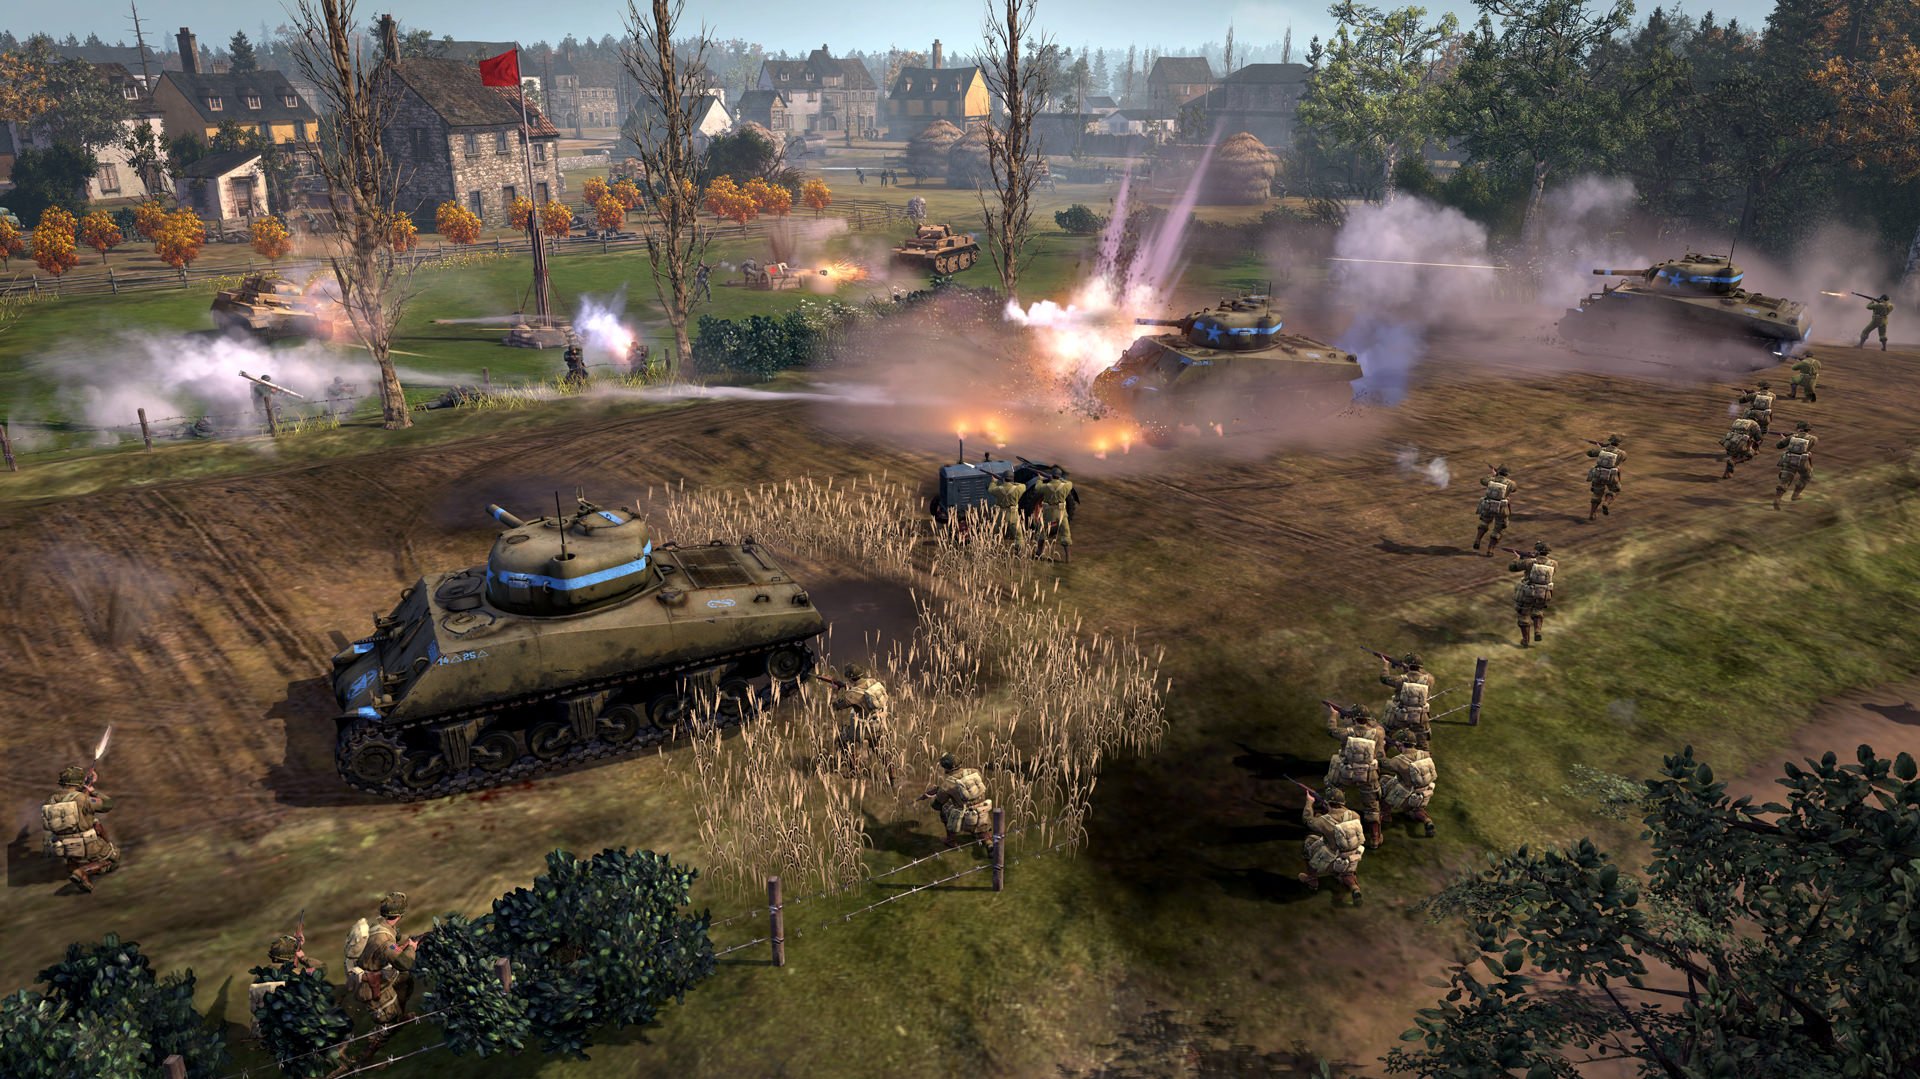 company of heroes 2: the western front armies: us forces free